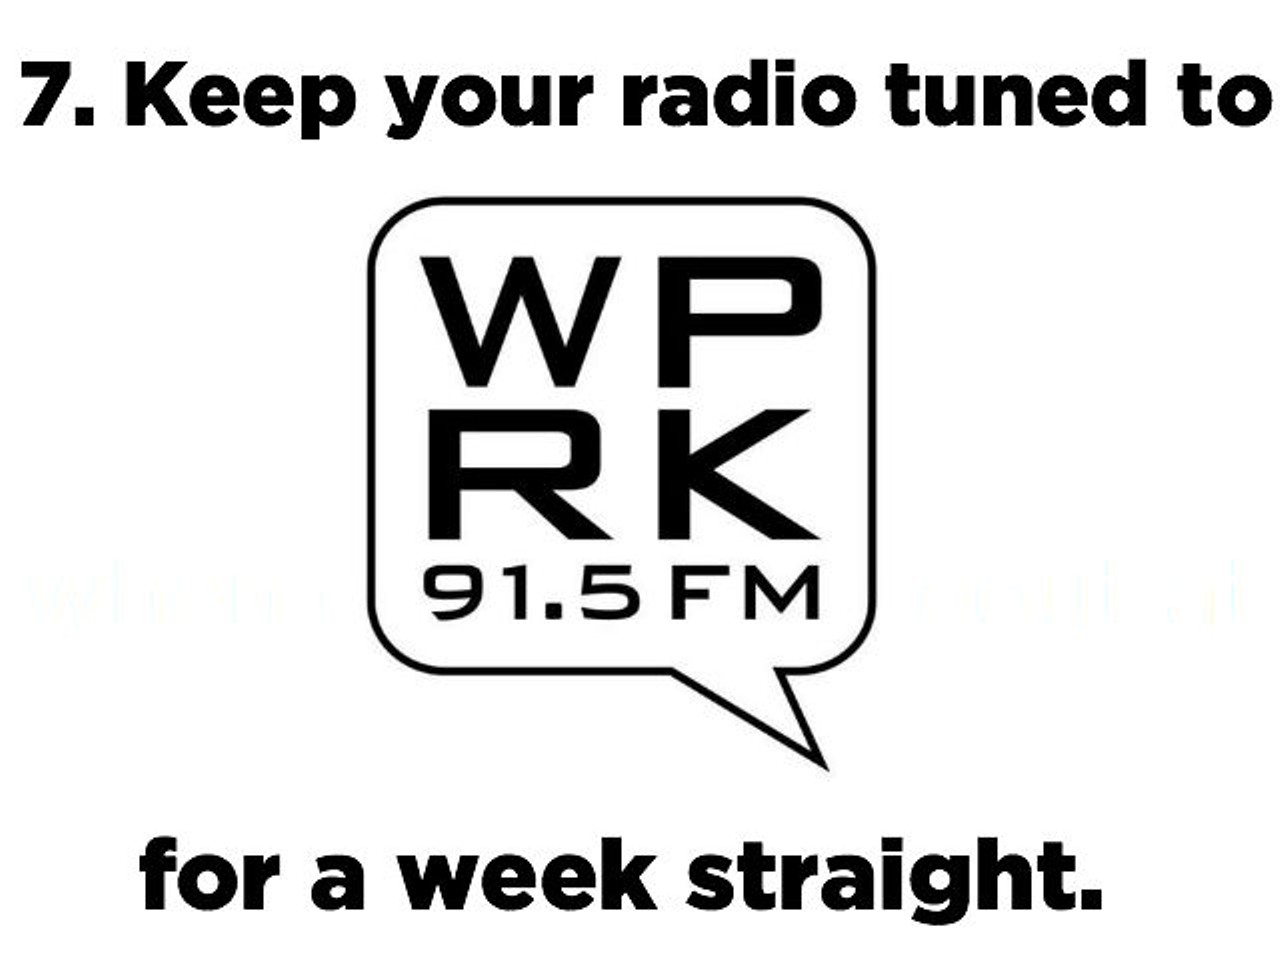 7. Keep your radio tuned to WPRK 91.5 FM, &#147;the best in basement radio,&#148; for a week straight.